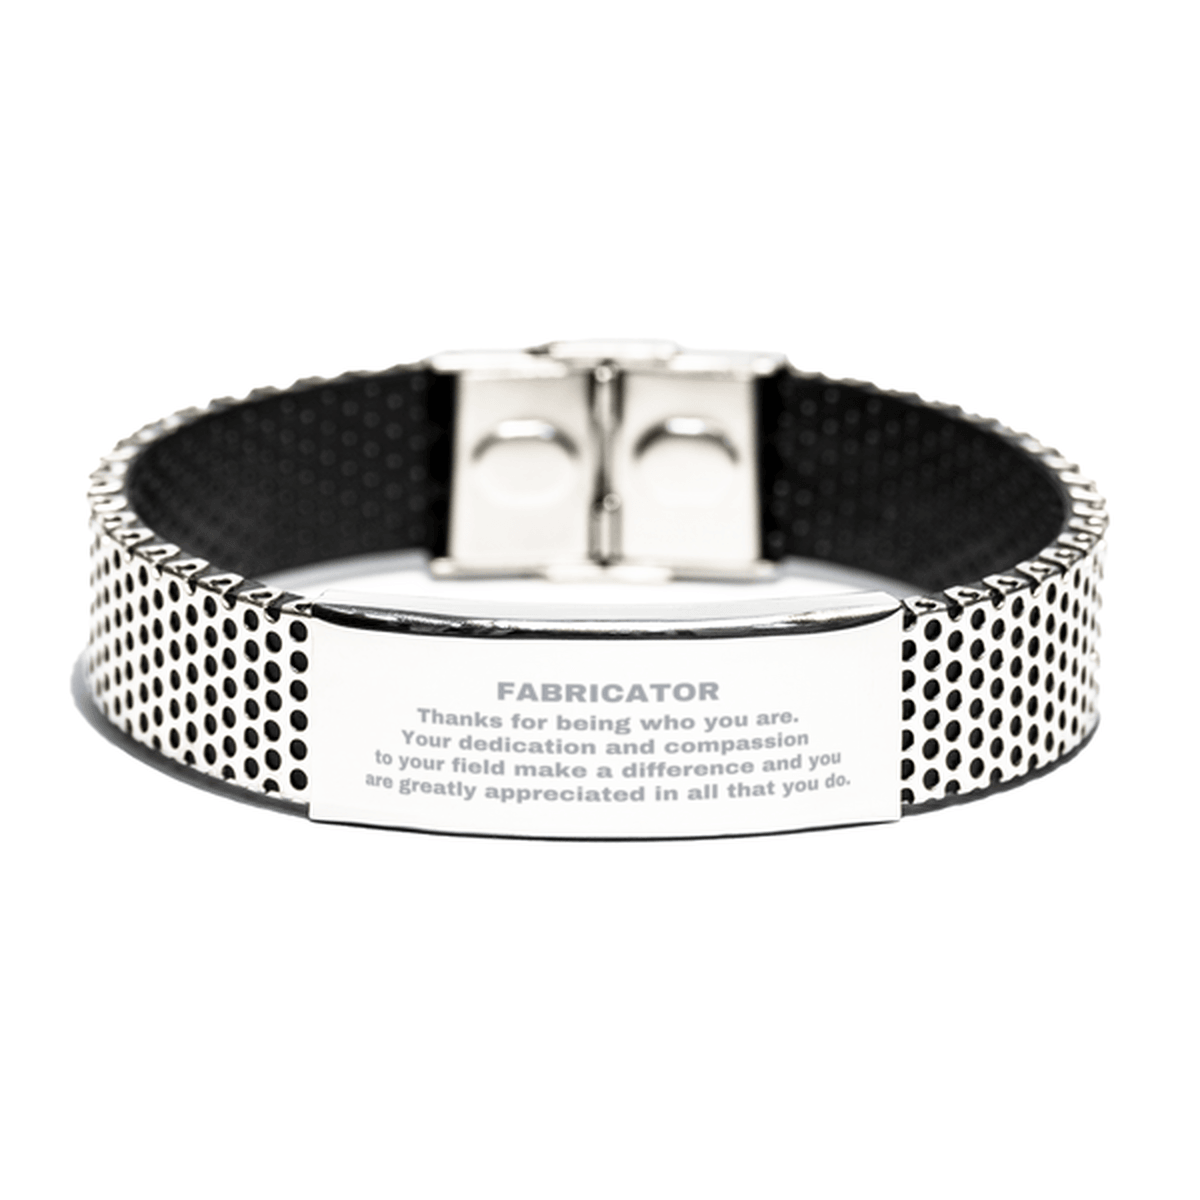 Fabricator Silver Shark Mesh Stainless Steel Engraved Bracelet - Thanks for being who you are - Birthday Christmas Jewelry Gifts Coworkers Colleague Boss - Mallard Moon Gift Shop